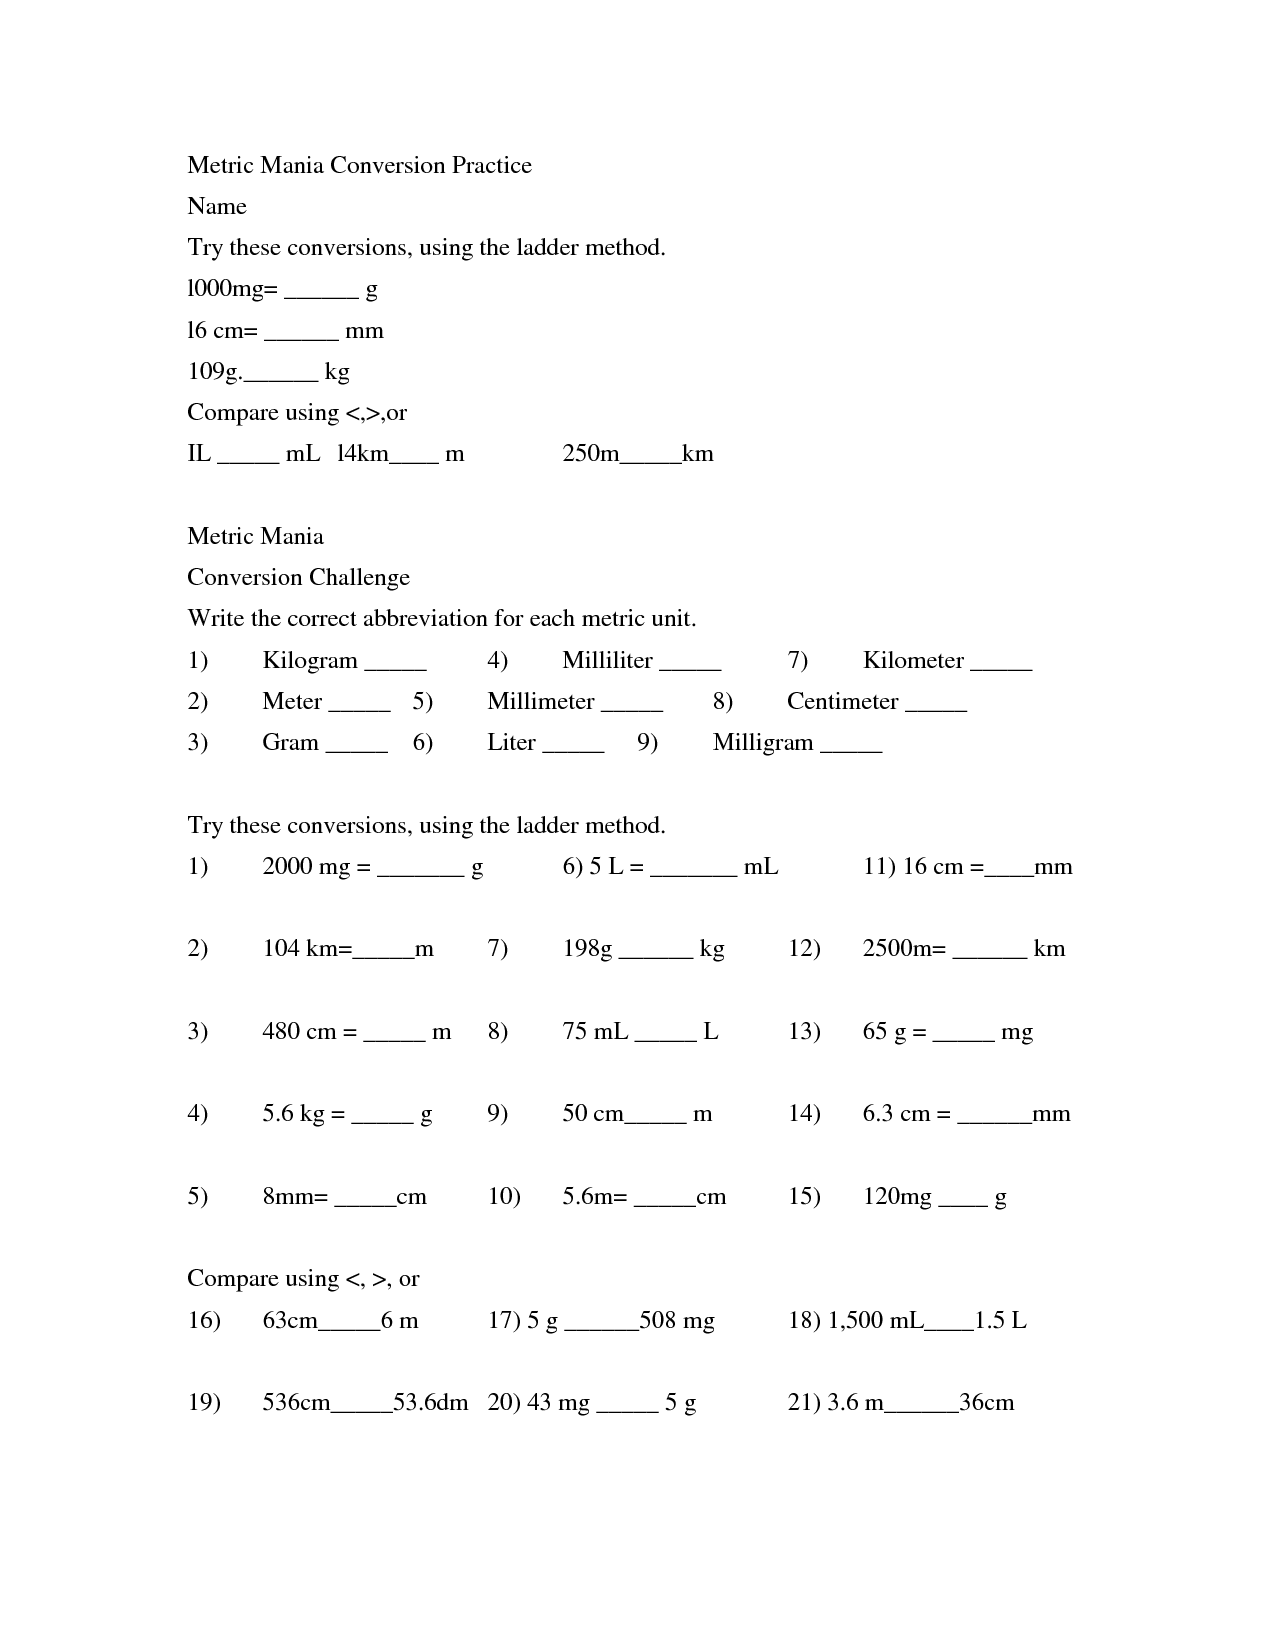 15-best-images-of-metric-mania-worksheet-answer-key-metric-system